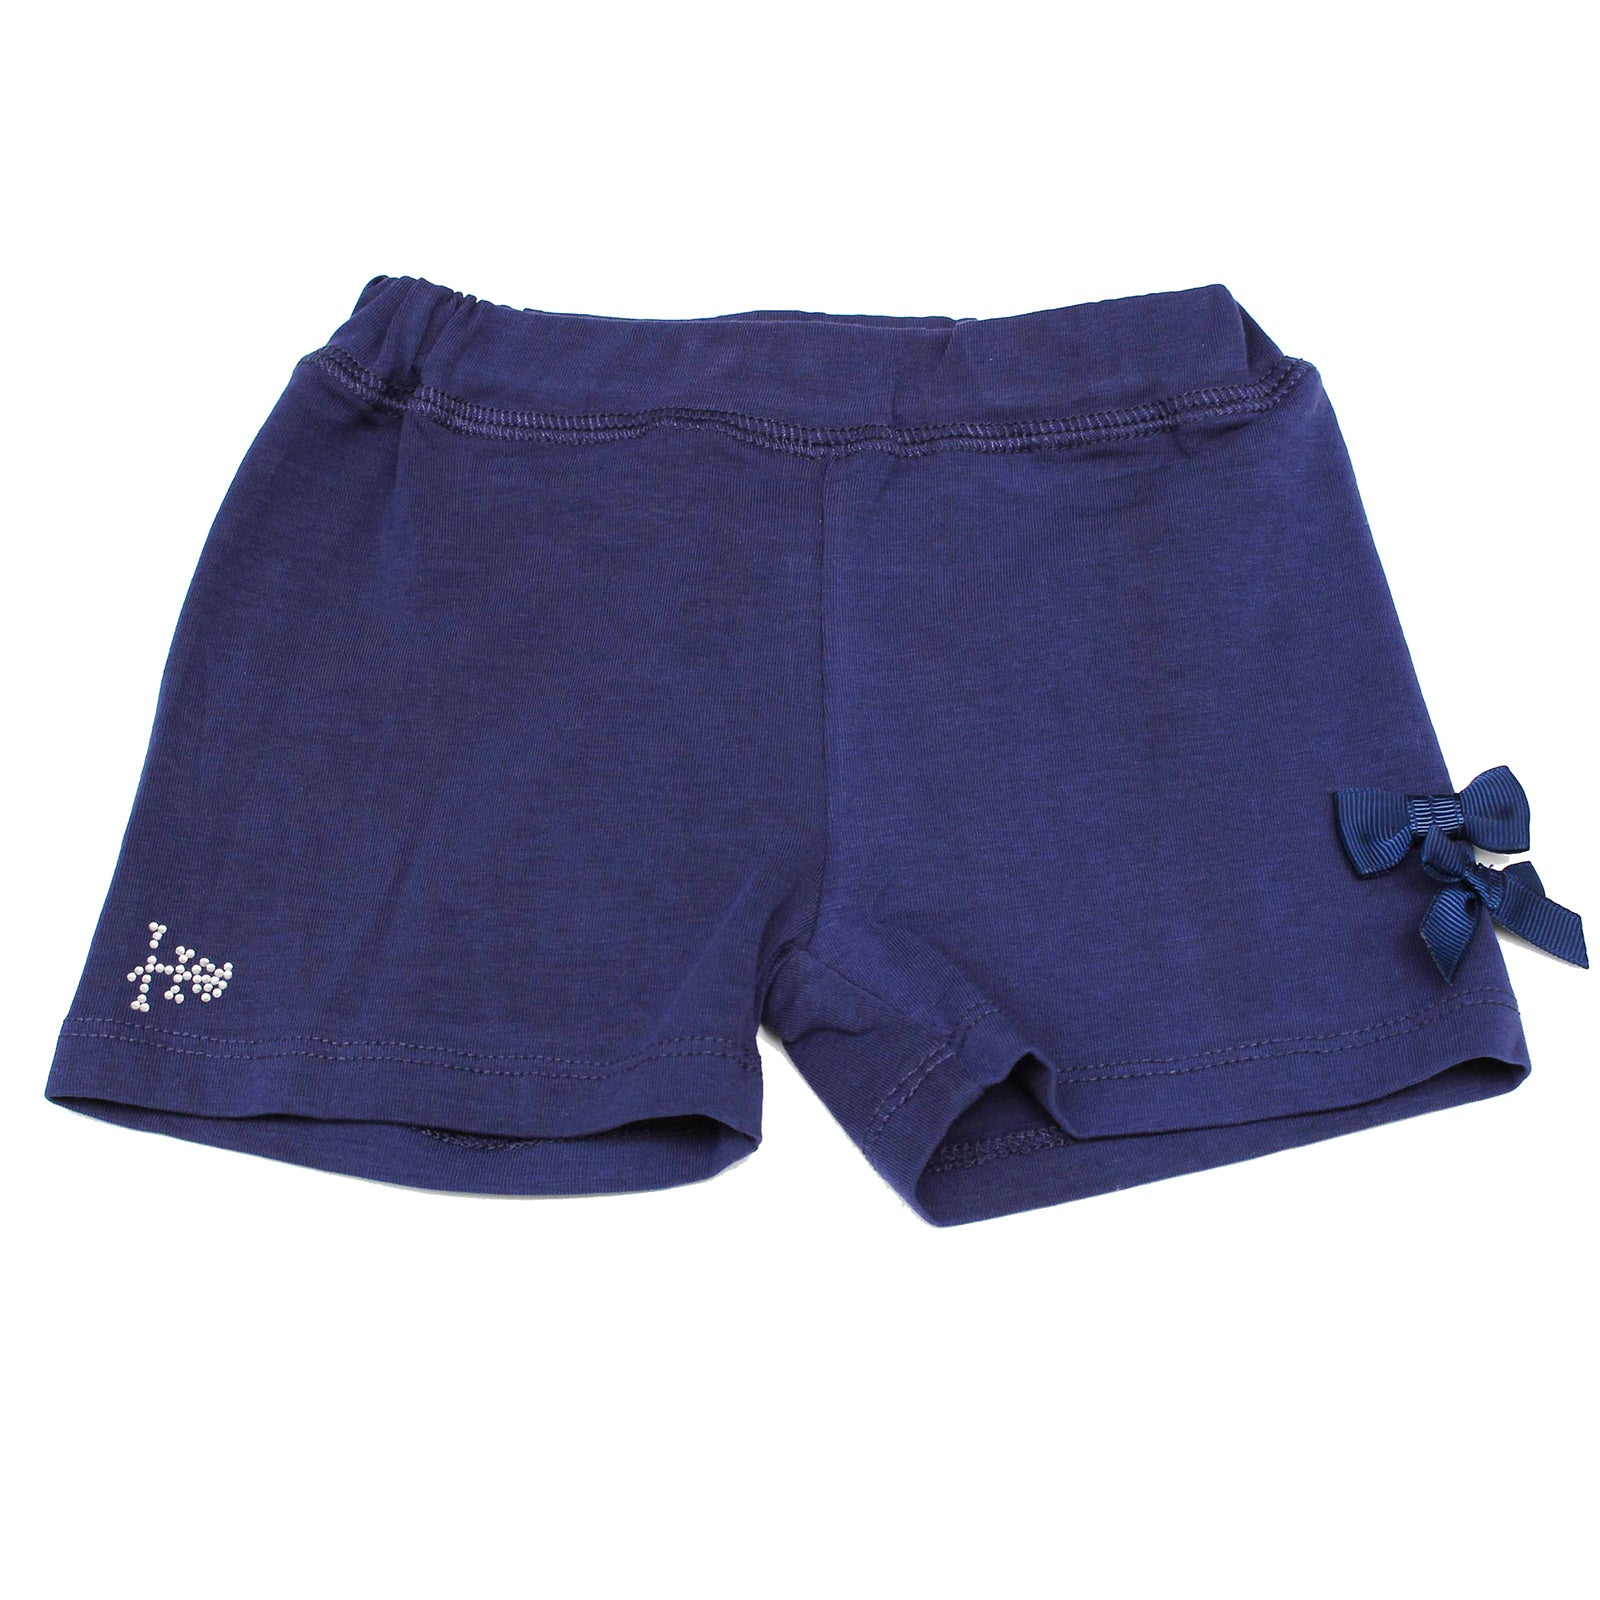 
  Shorts from the Silvian Heach girl's clothing line in basic cotton with elasticated waist and ...